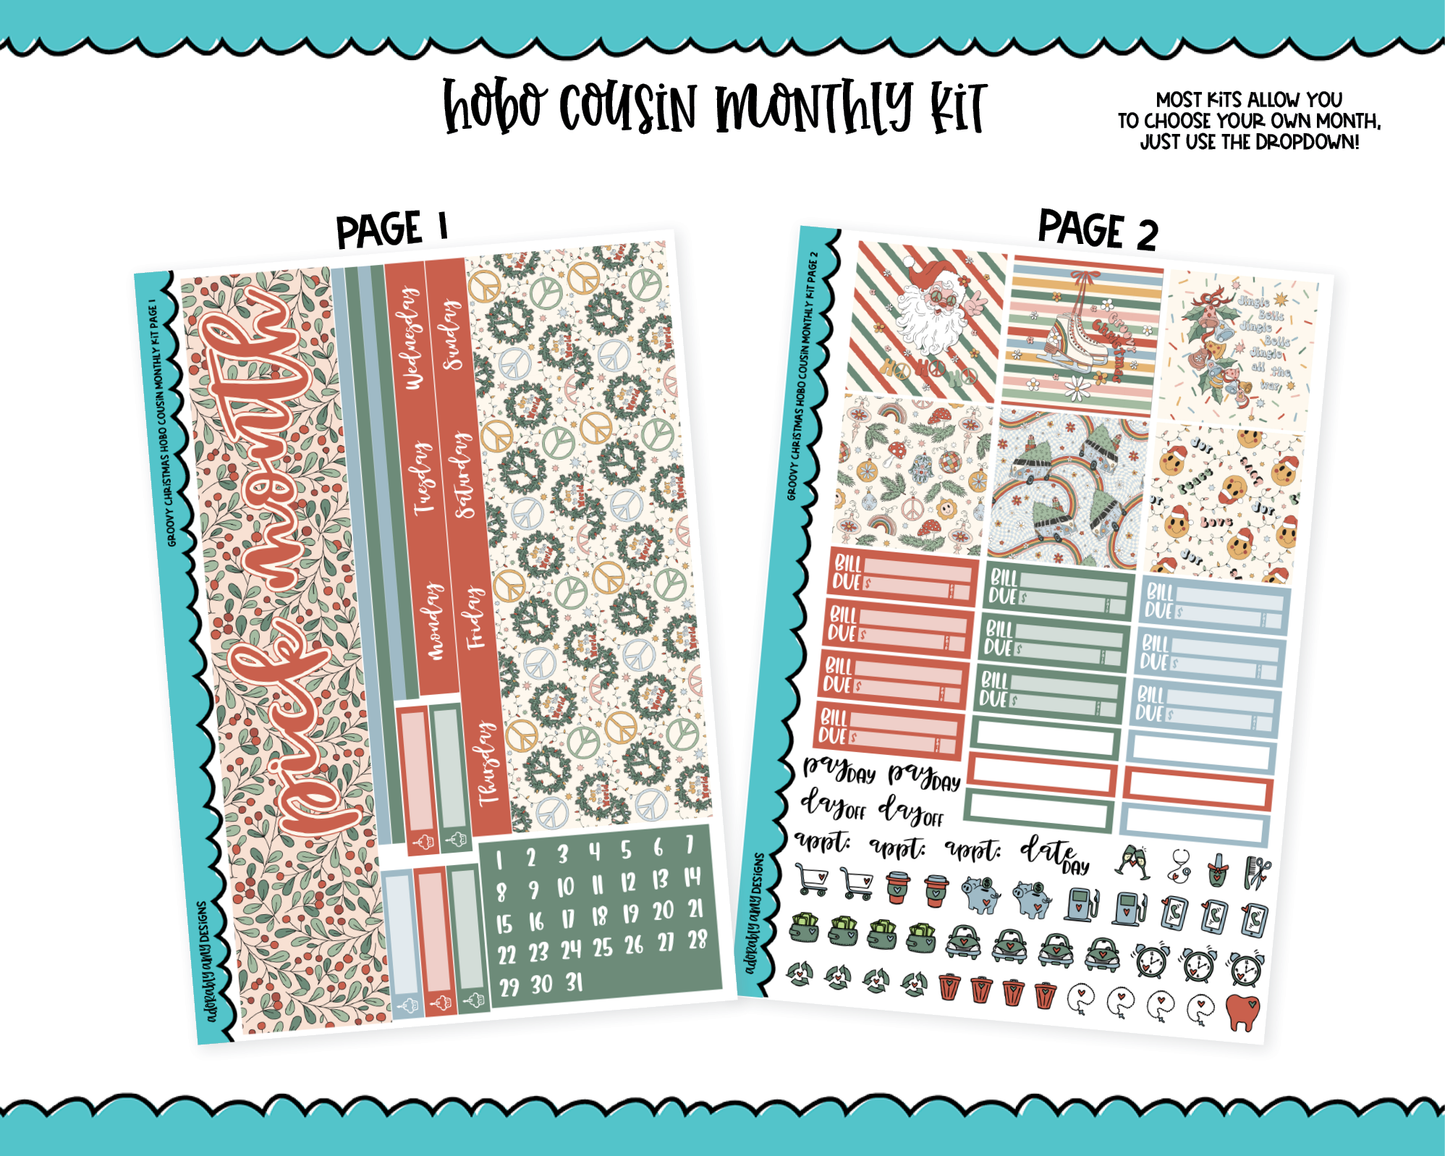 Hobonichi Cousin Monthly Pick Your Month Groovy Christmas Planner Sticker Kit for Hobo Cousin or Similar Planners